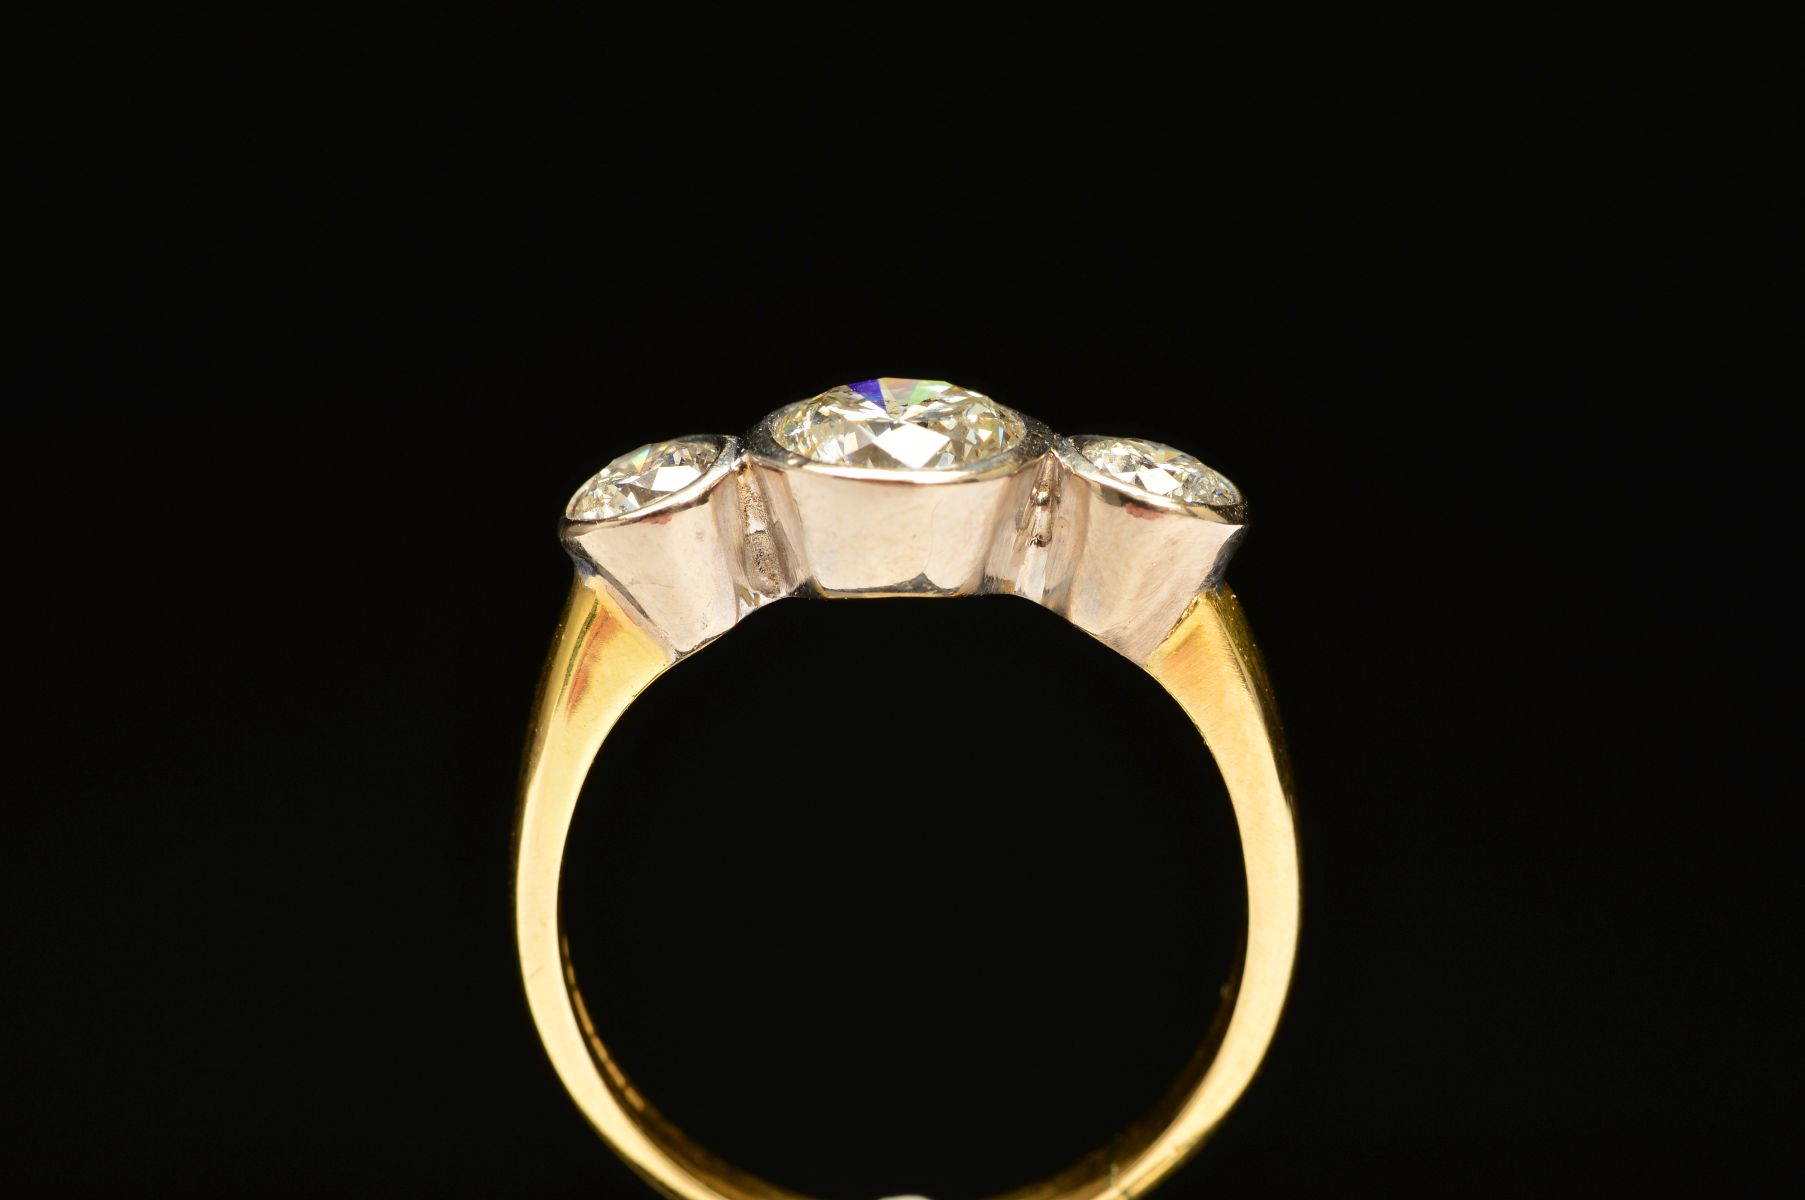 AN 18CT GOLD THREE STONE DIAMOND RING, designed as three brilliant cut diamonds within collet - Image 5 of 5